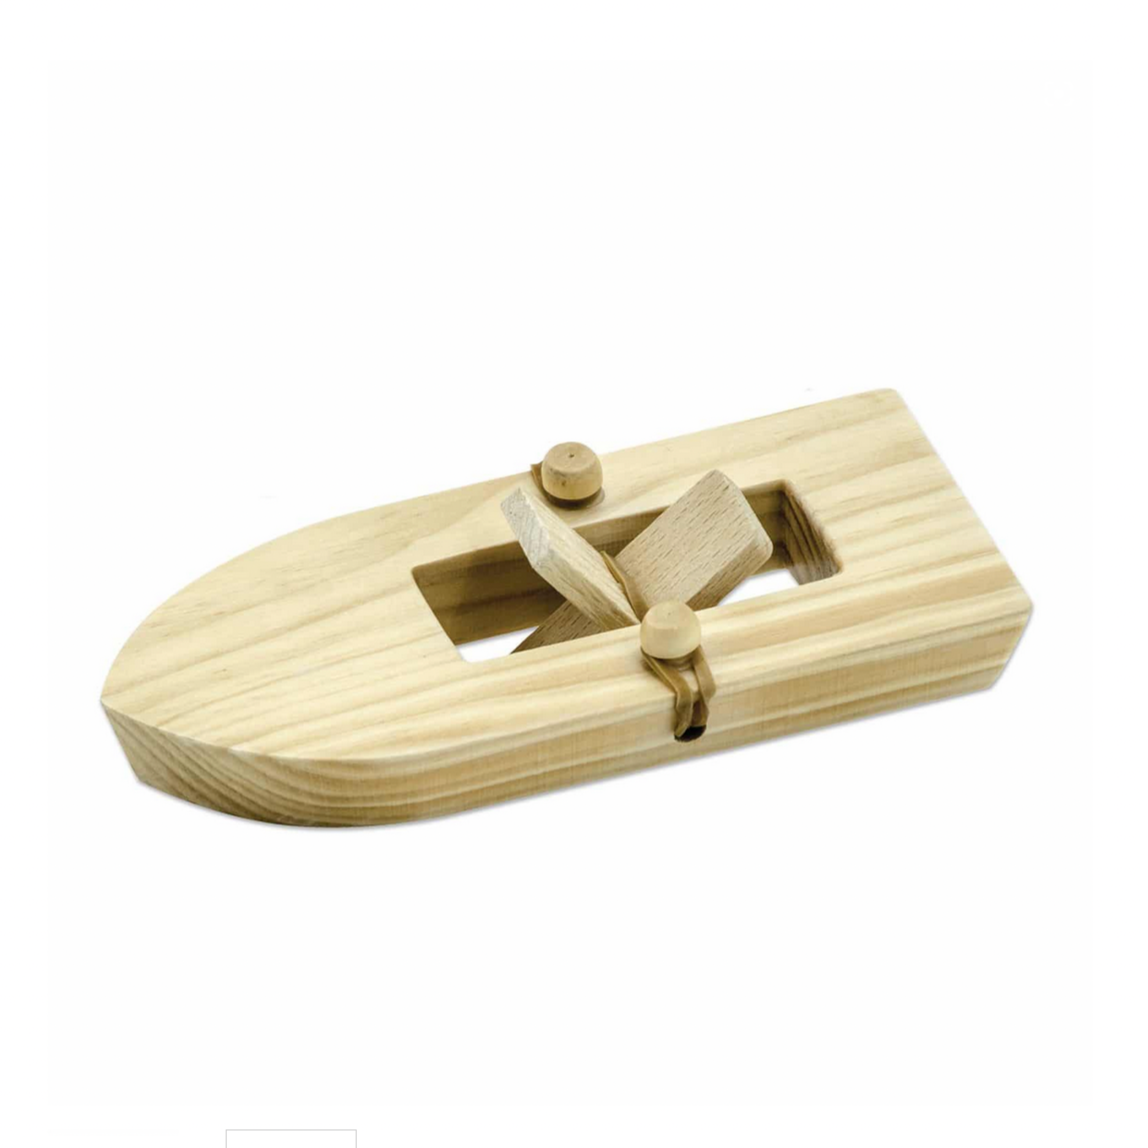 Paddle Boat Rubber Band 4yrs+